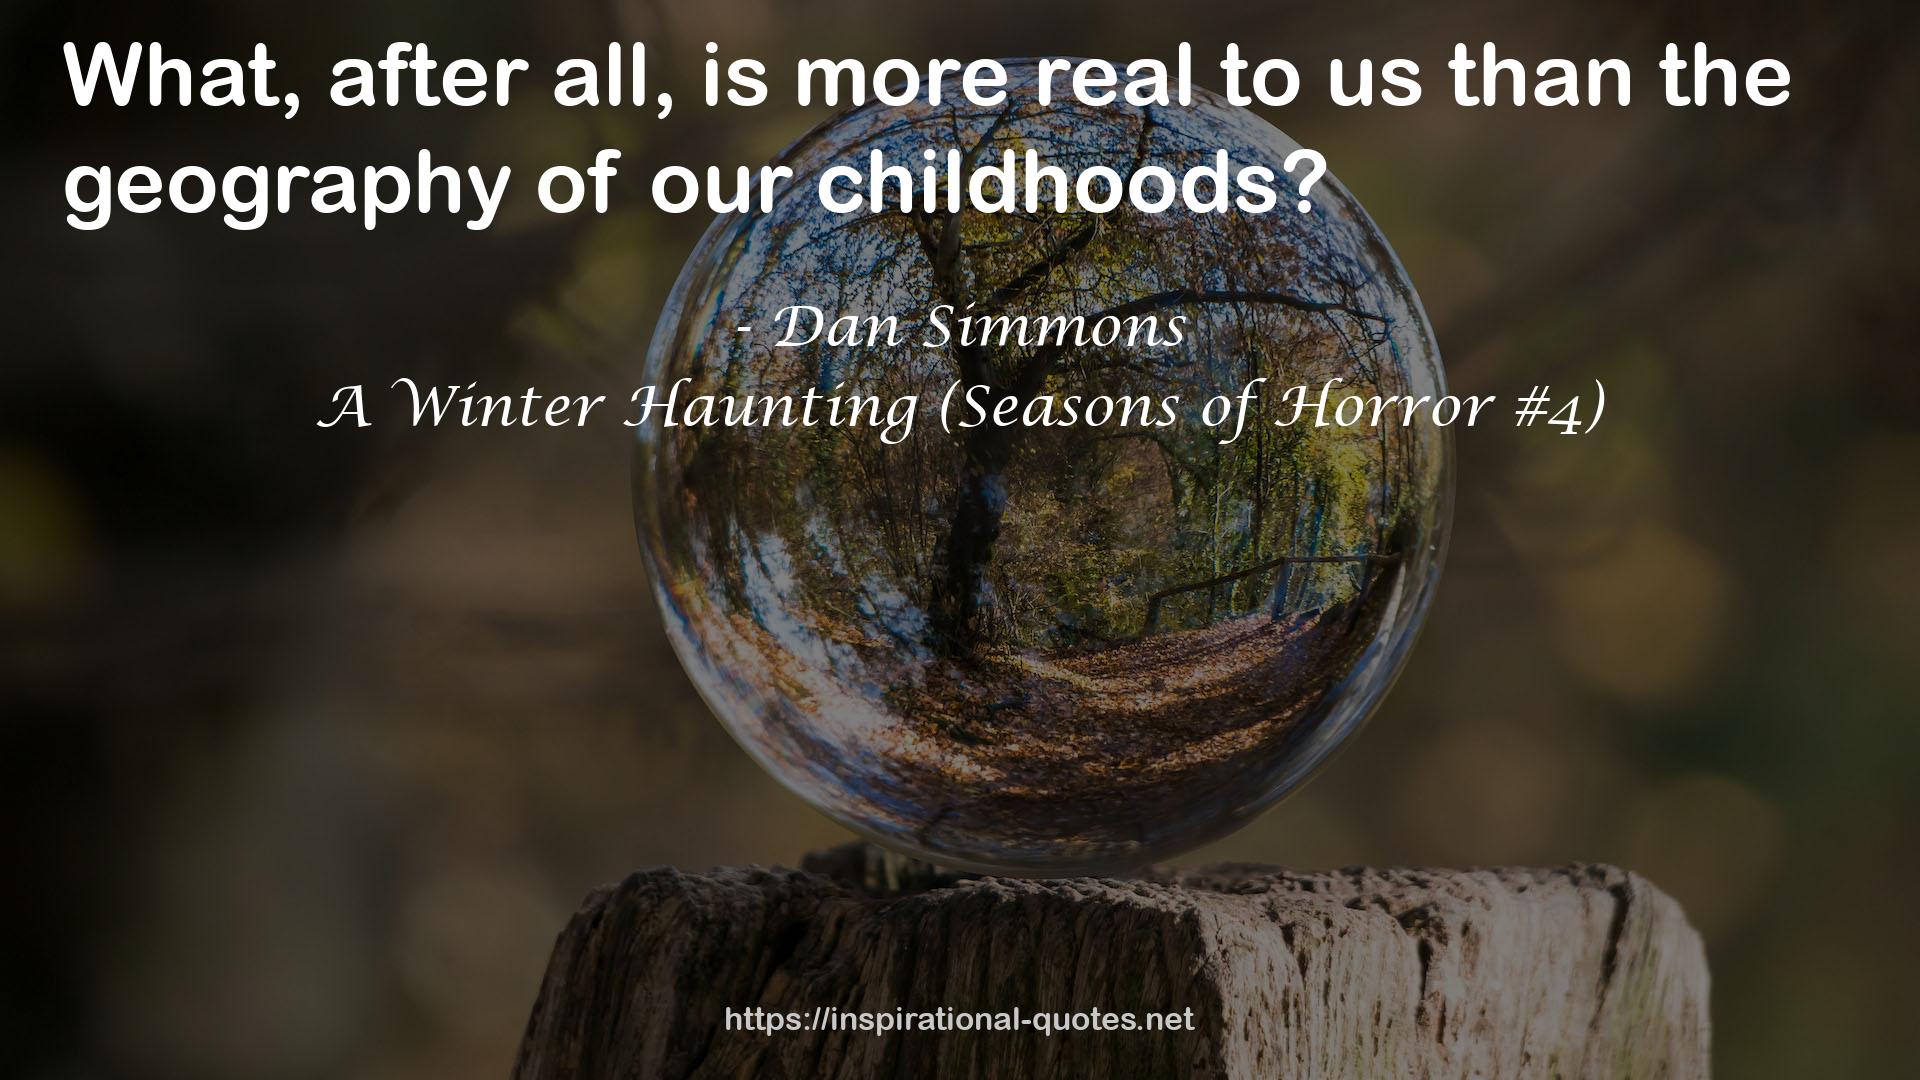 A Winter Haunting (Seasons of Horror #4) QUOTES